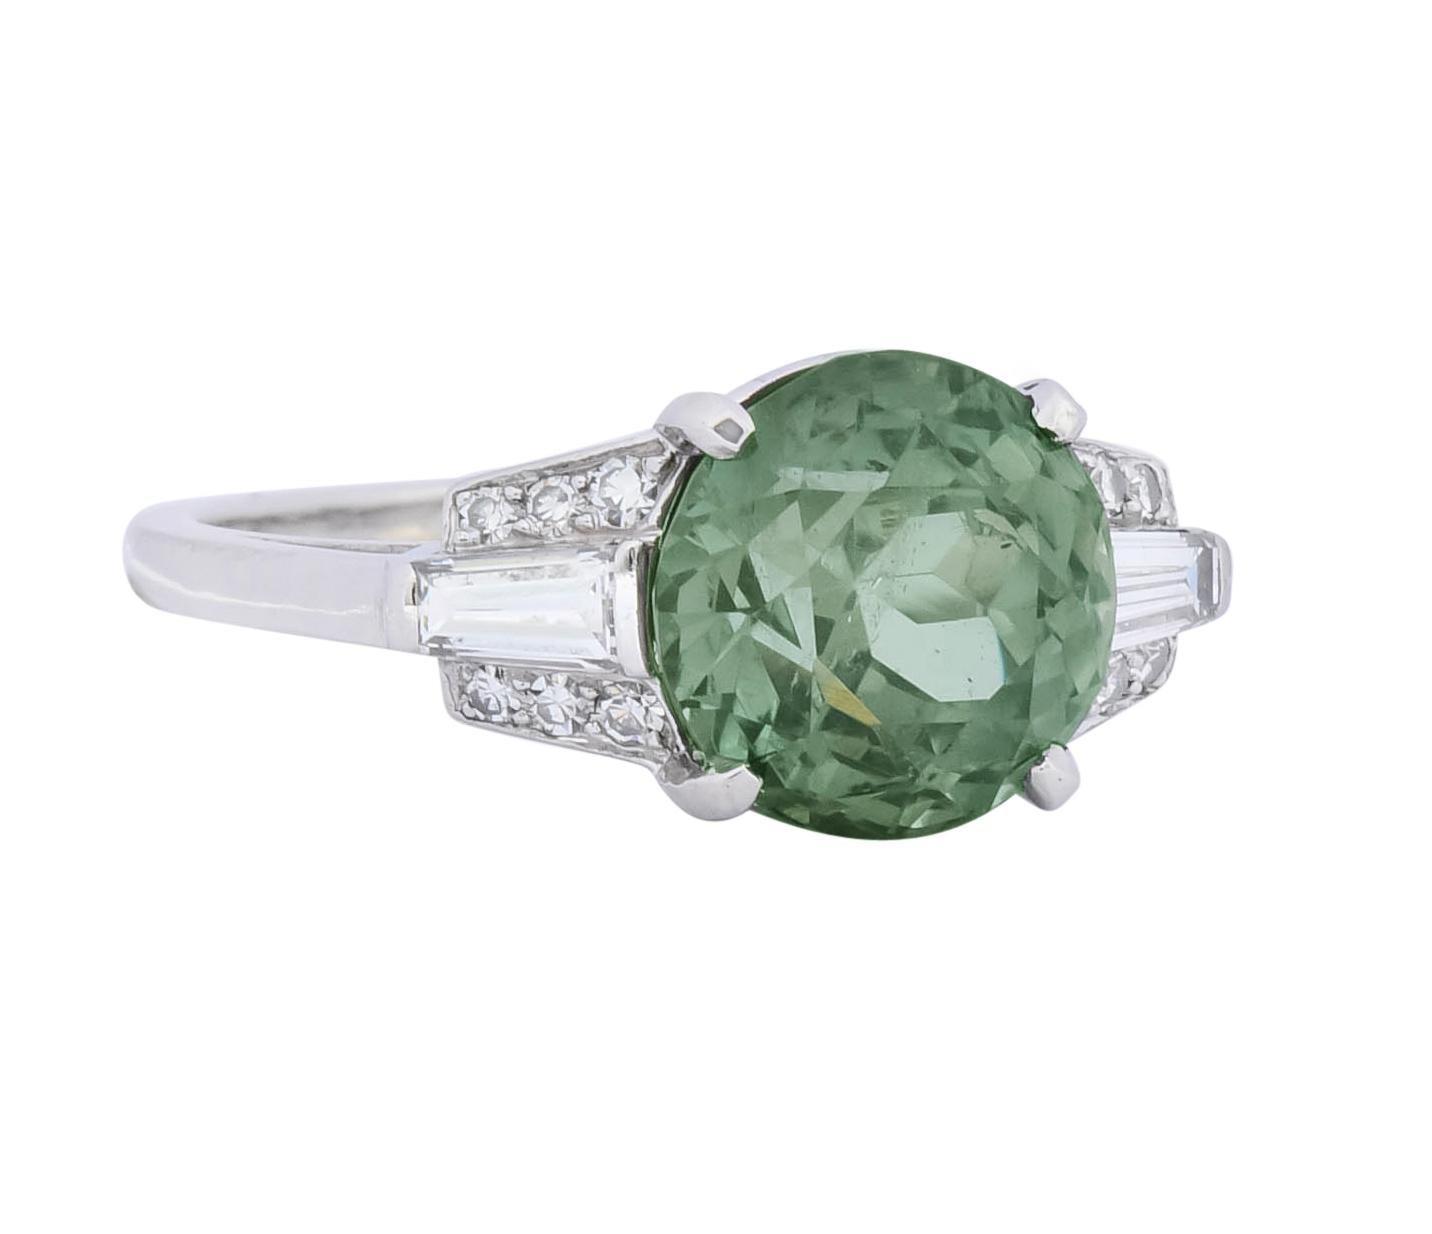 Basket cathedral style ring centering a round cut alexandrite weighing 5.05 carats, transparent and a striking yellowish-green in daylight

Alexandrite color changes to a light grayish-purple when exposed to incandescent light

Flanked by two bar